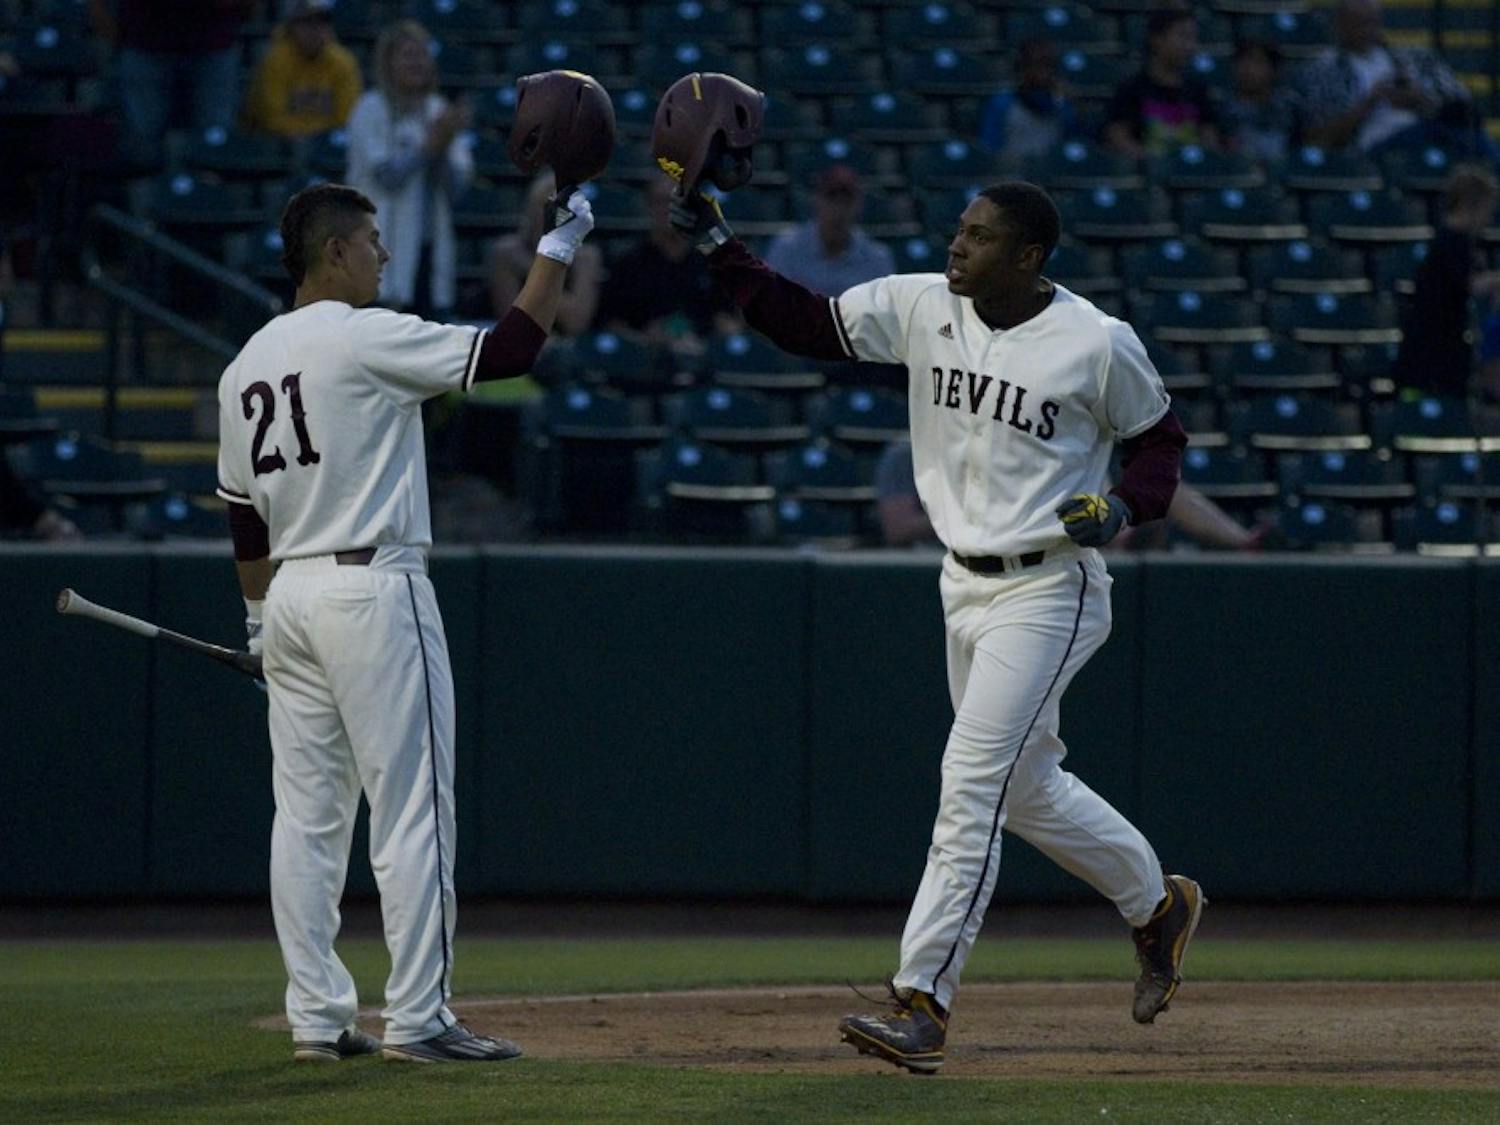 ASU sophomore outfielder Tyler Williams (25) celebrates with ASU freshman infielder Carter Aldrete (21) after hitting a home run during a baseball game against the UNLV Rebels at Phoenix Municipal Stadium in Phoenix on Tuesday, April 11, 2017. ASU won 5-3.